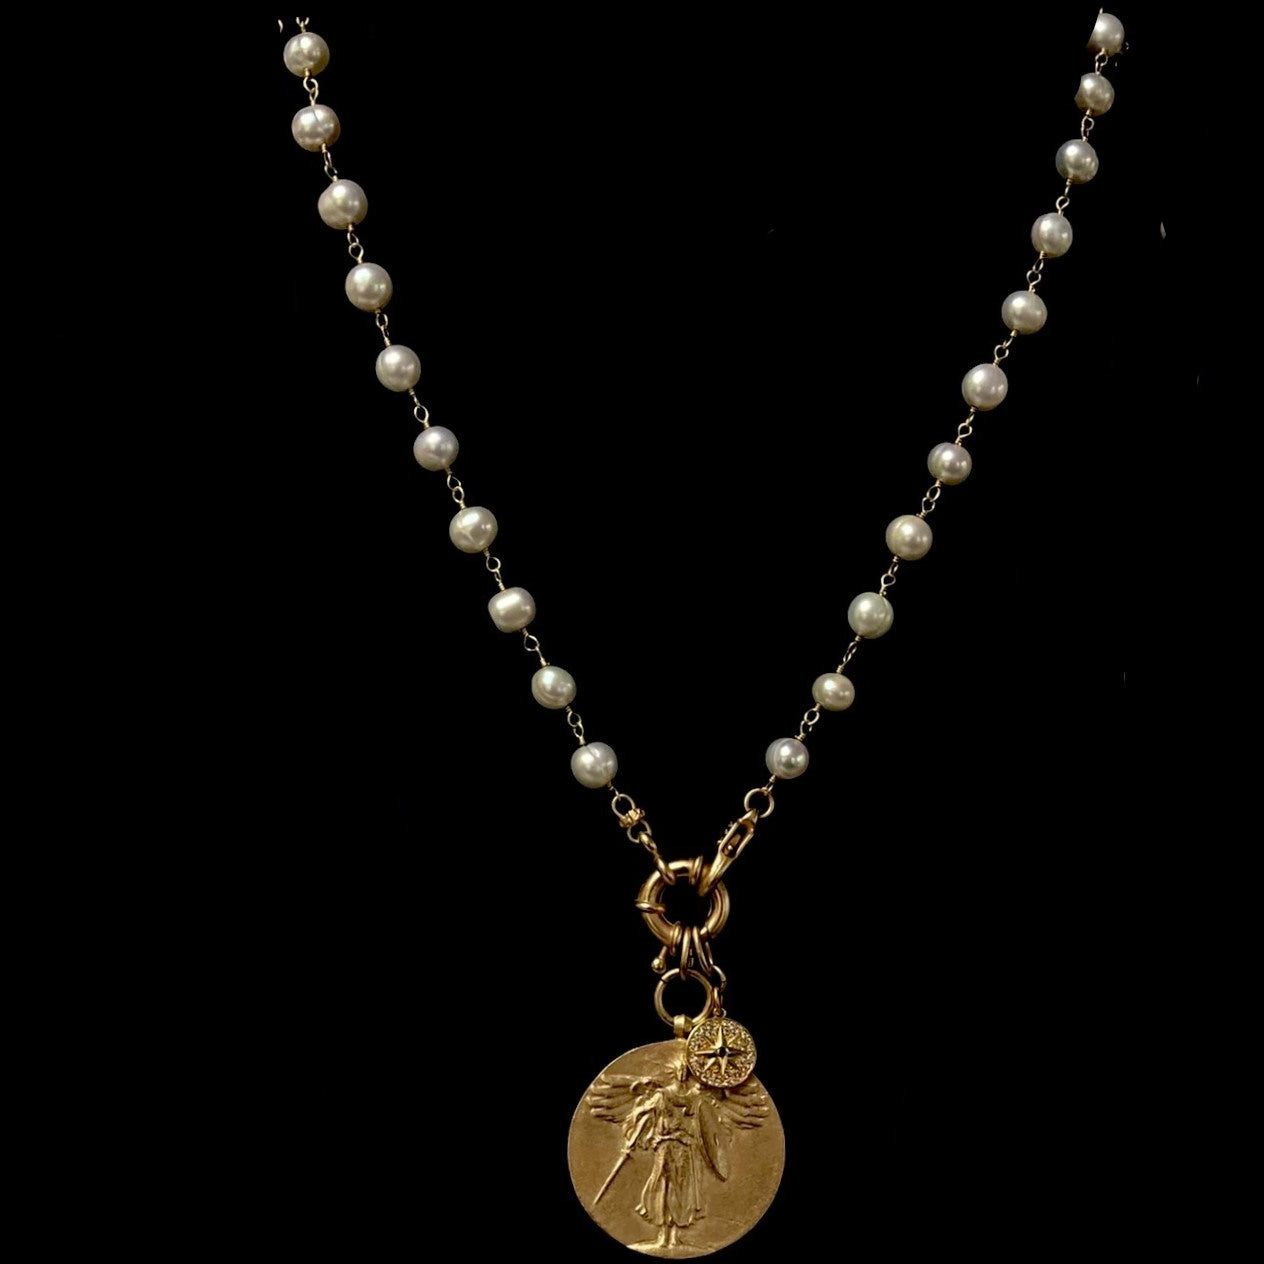 Saint Michael True North Freshwater Pearl Necklace